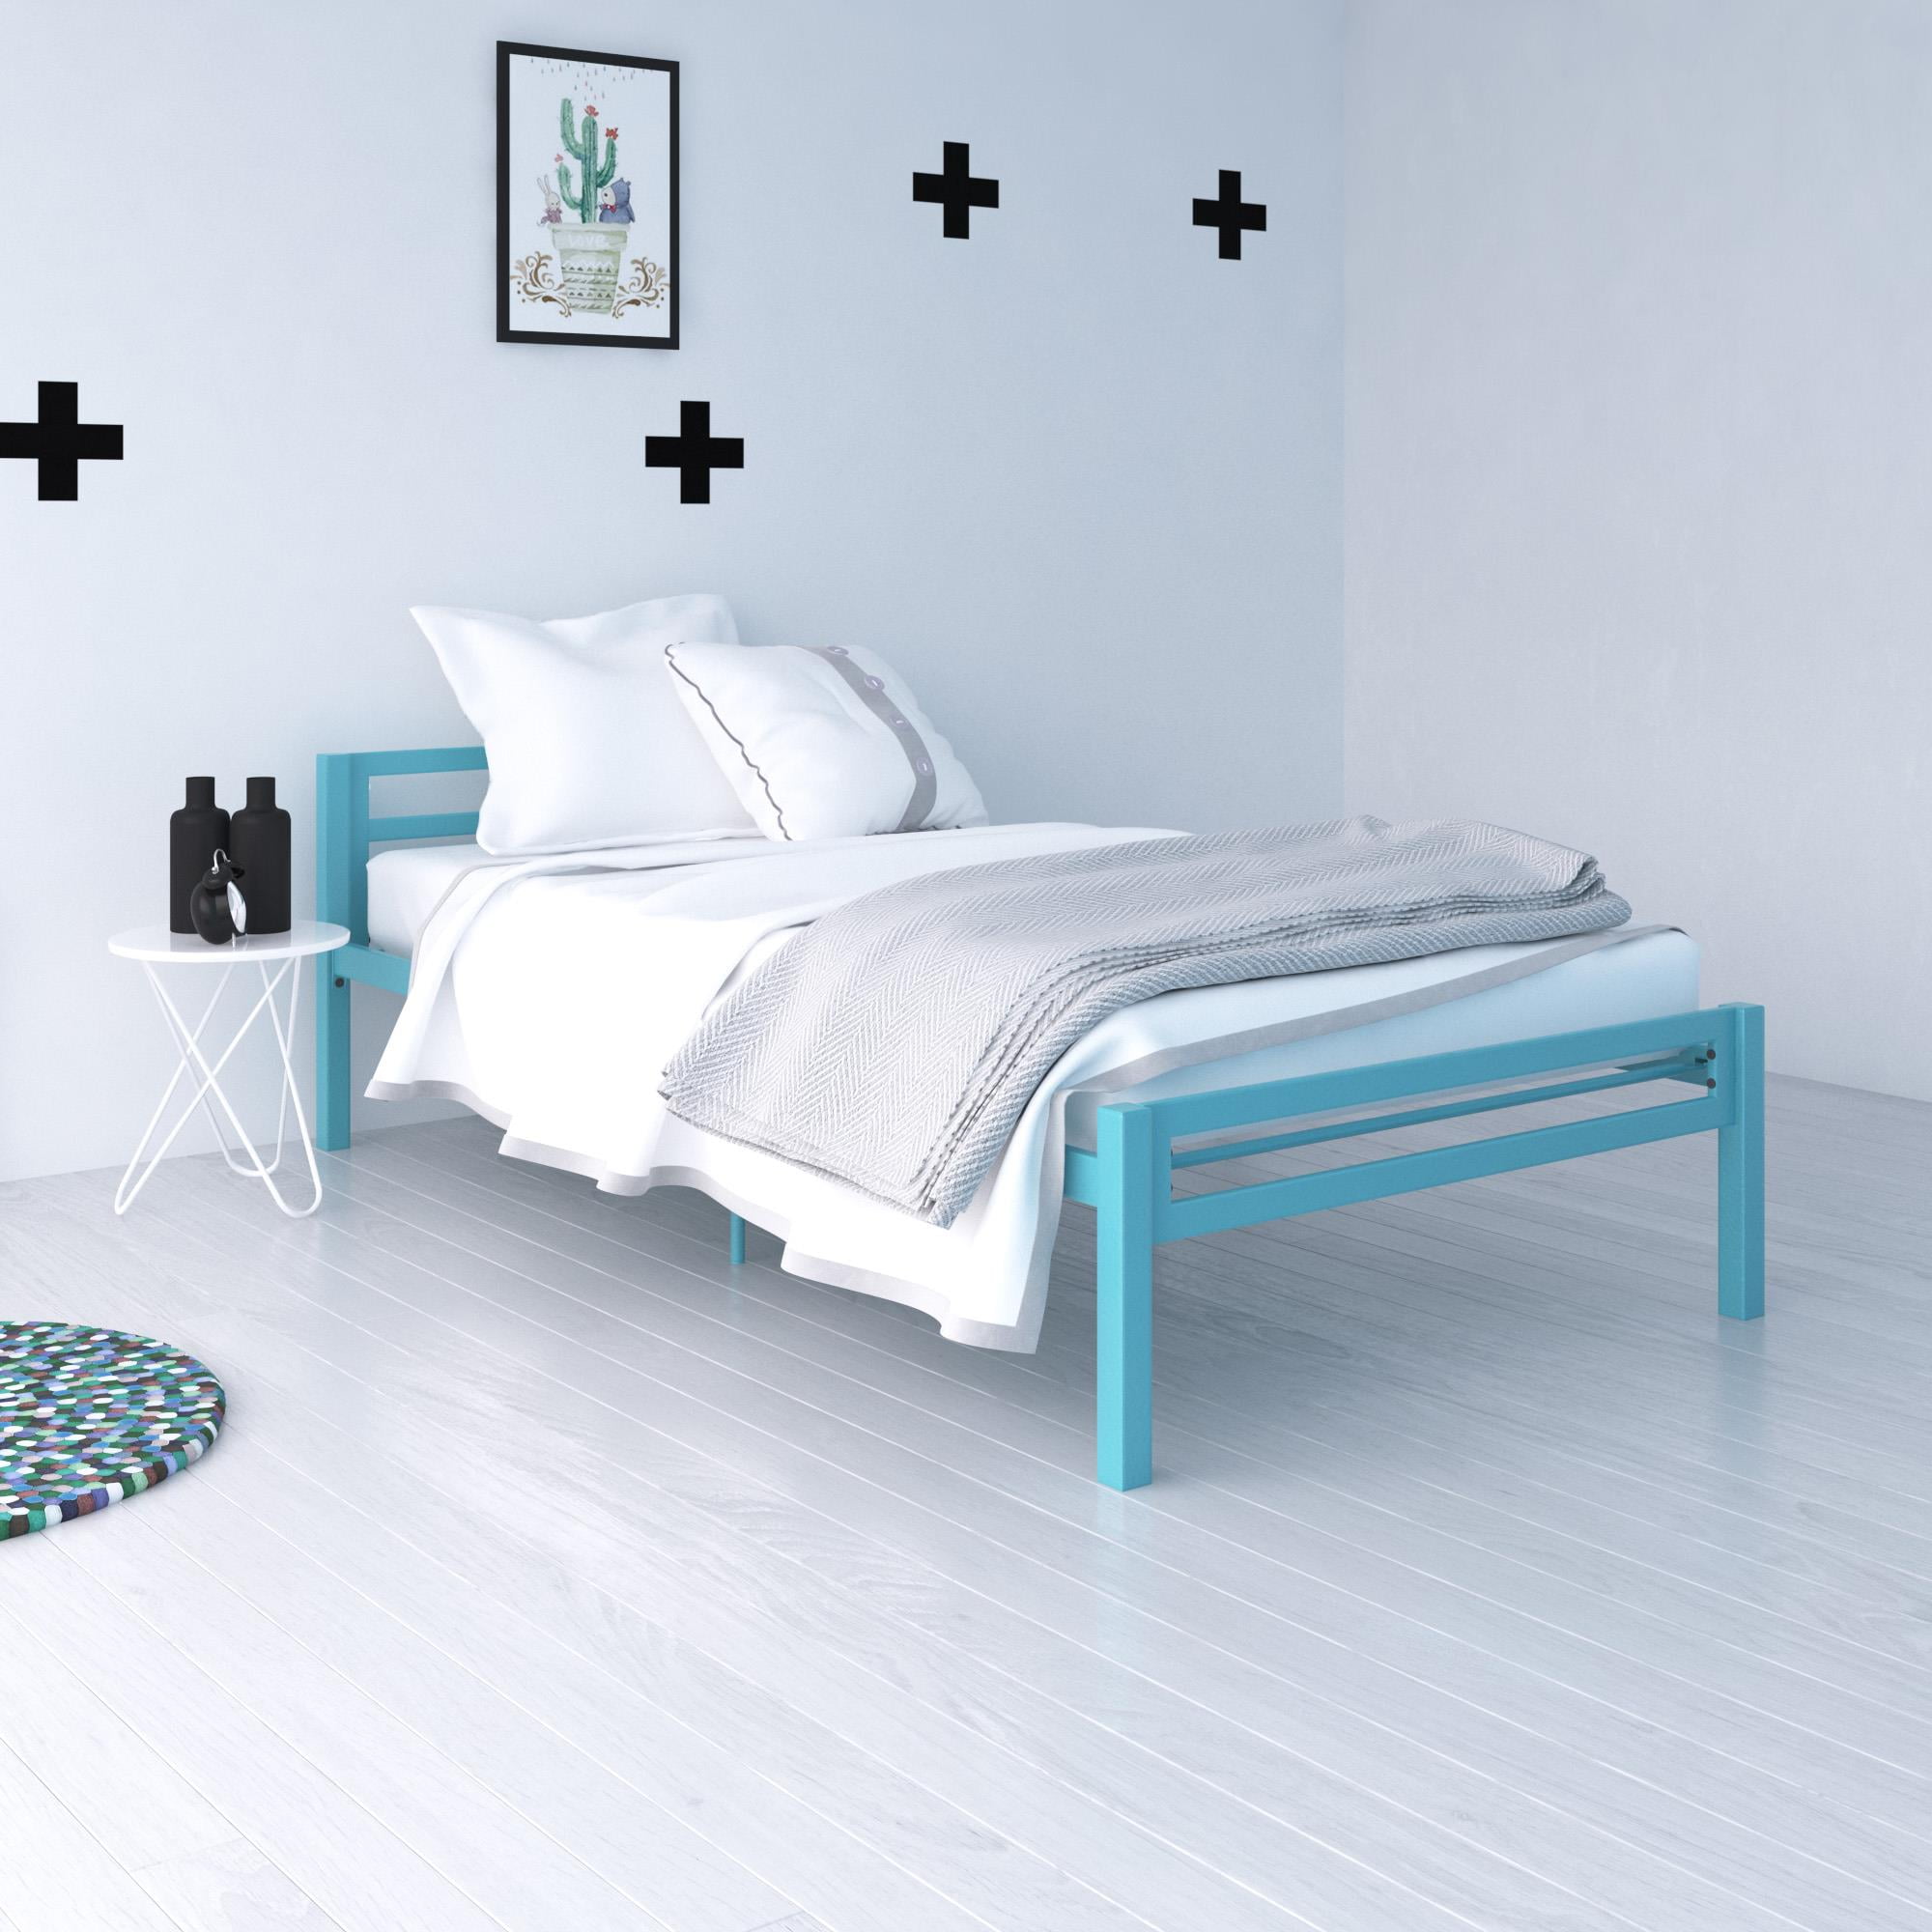 Mainstays Premium Metal Twin Bed, Teal Twin Bed Frame